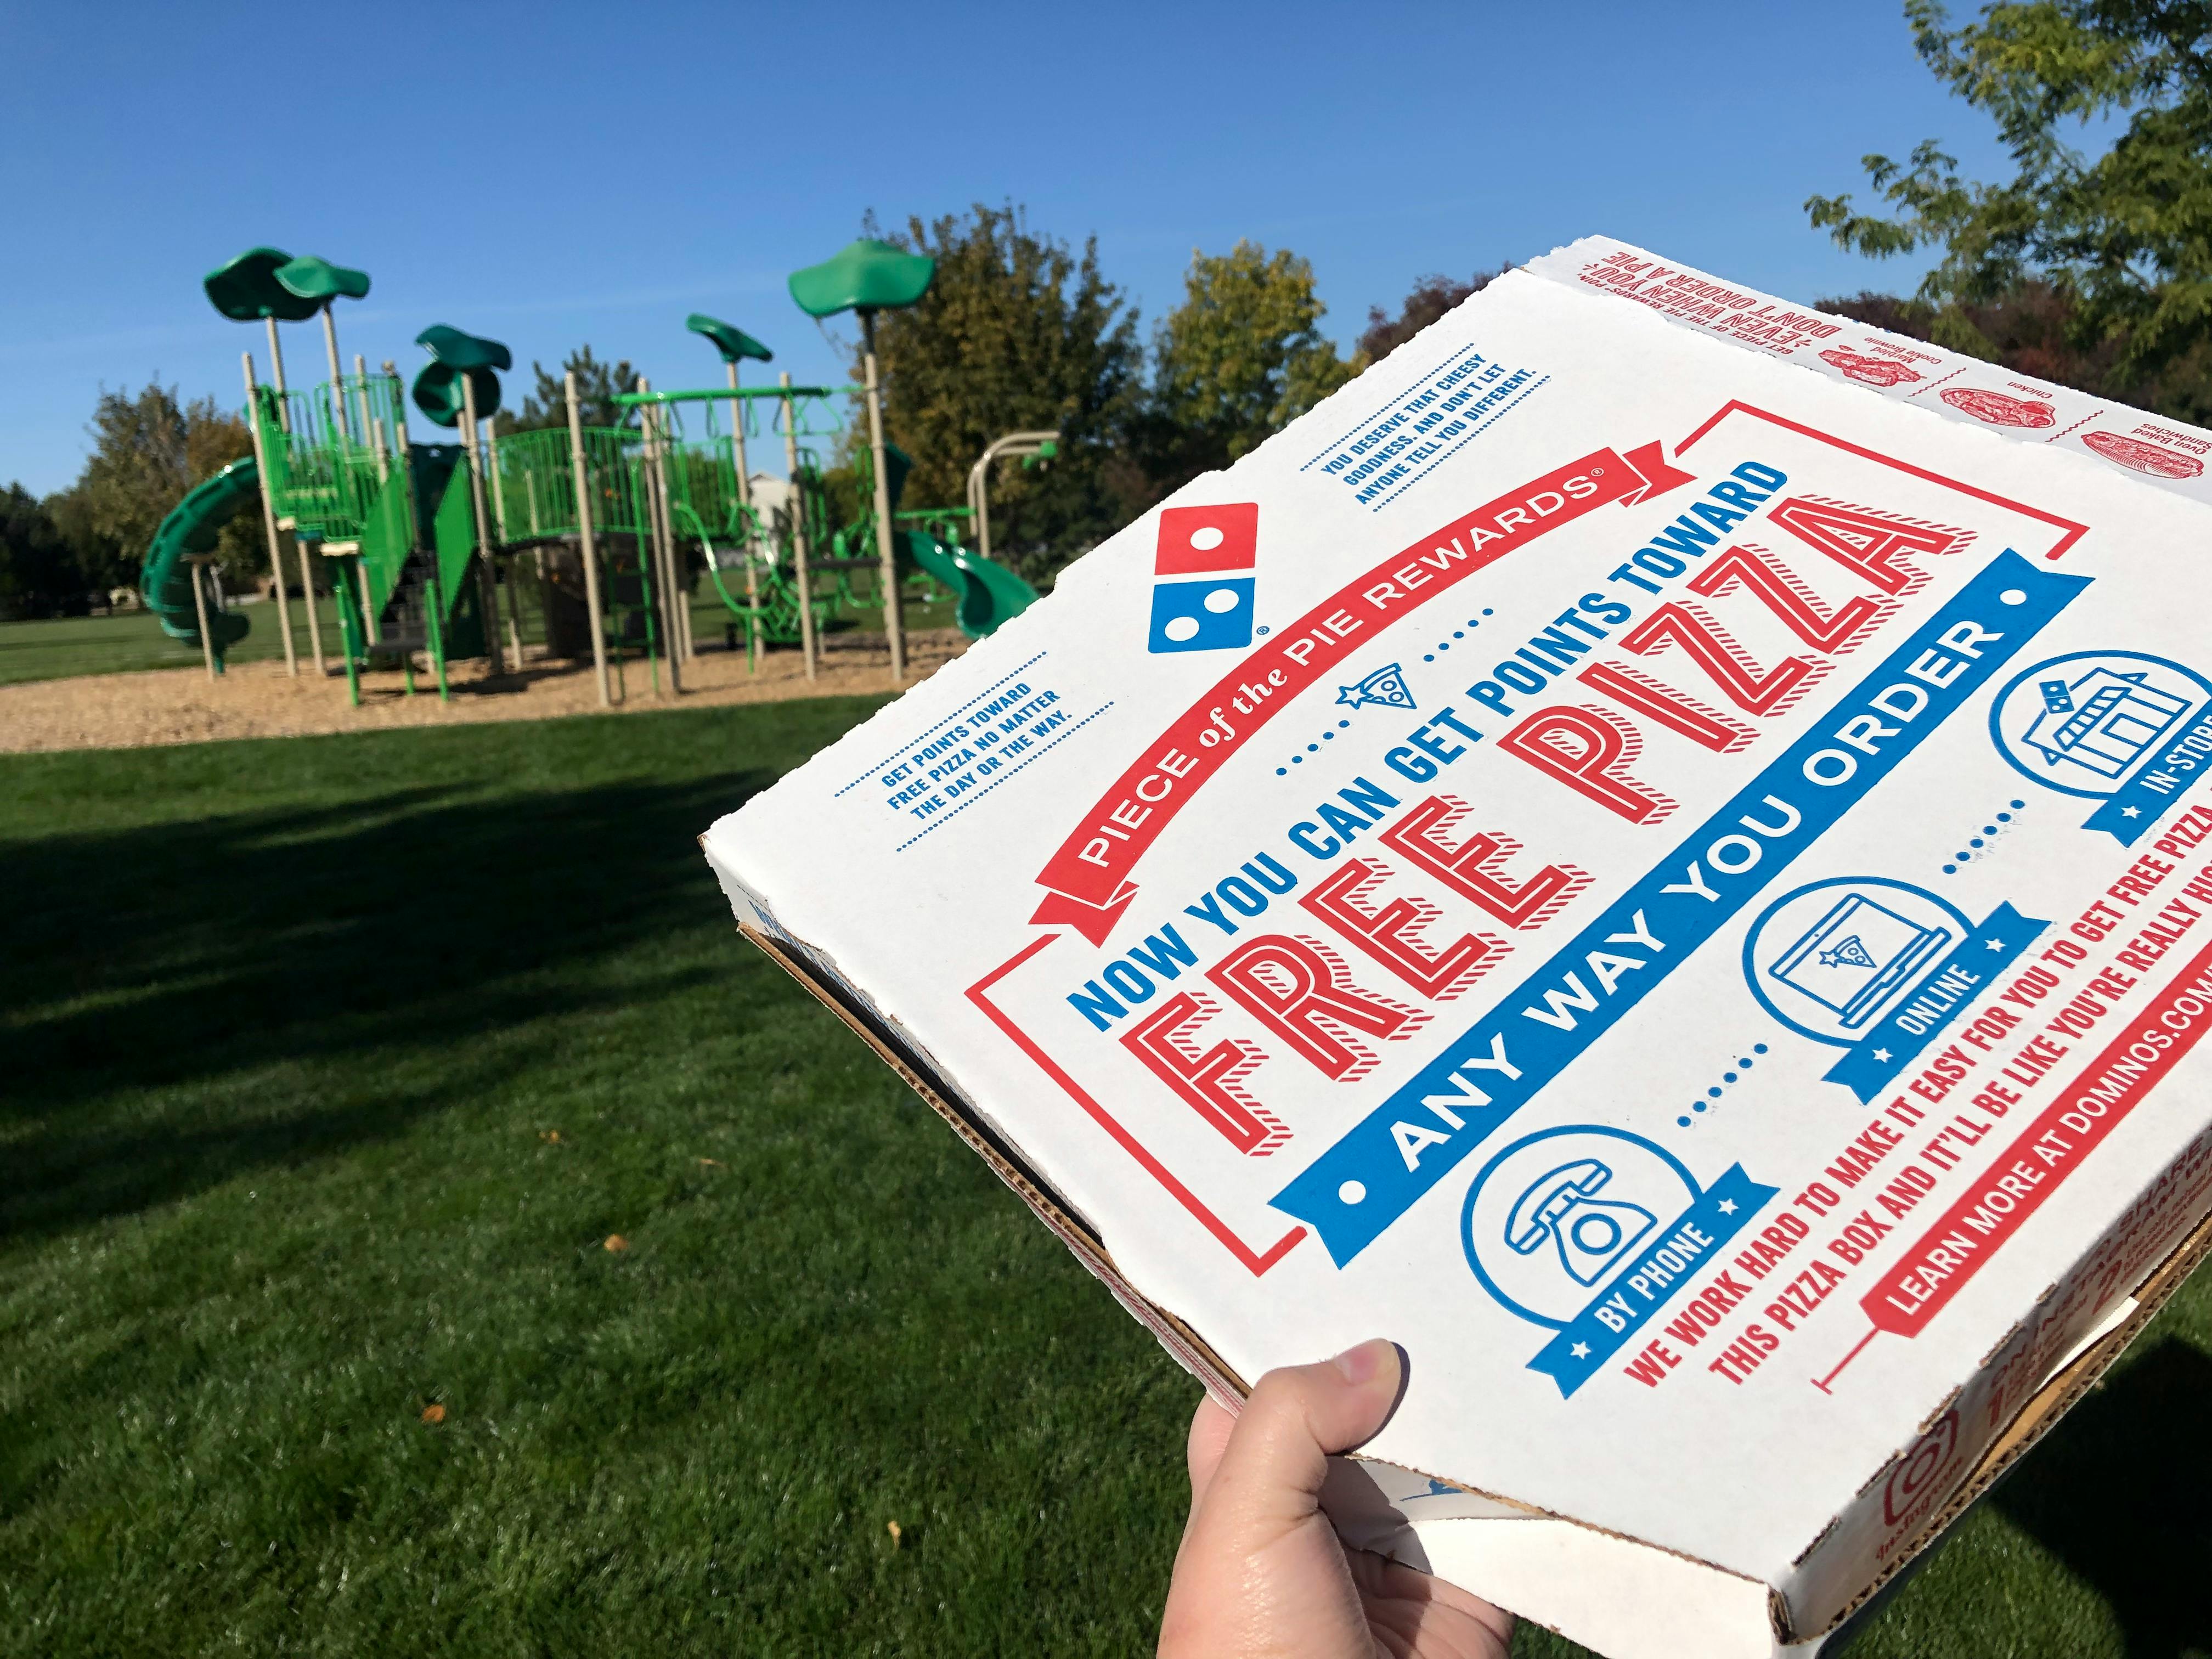 18 Genius Tips to Get Domino's Pizza Deals - The Krazy Coupon Lady